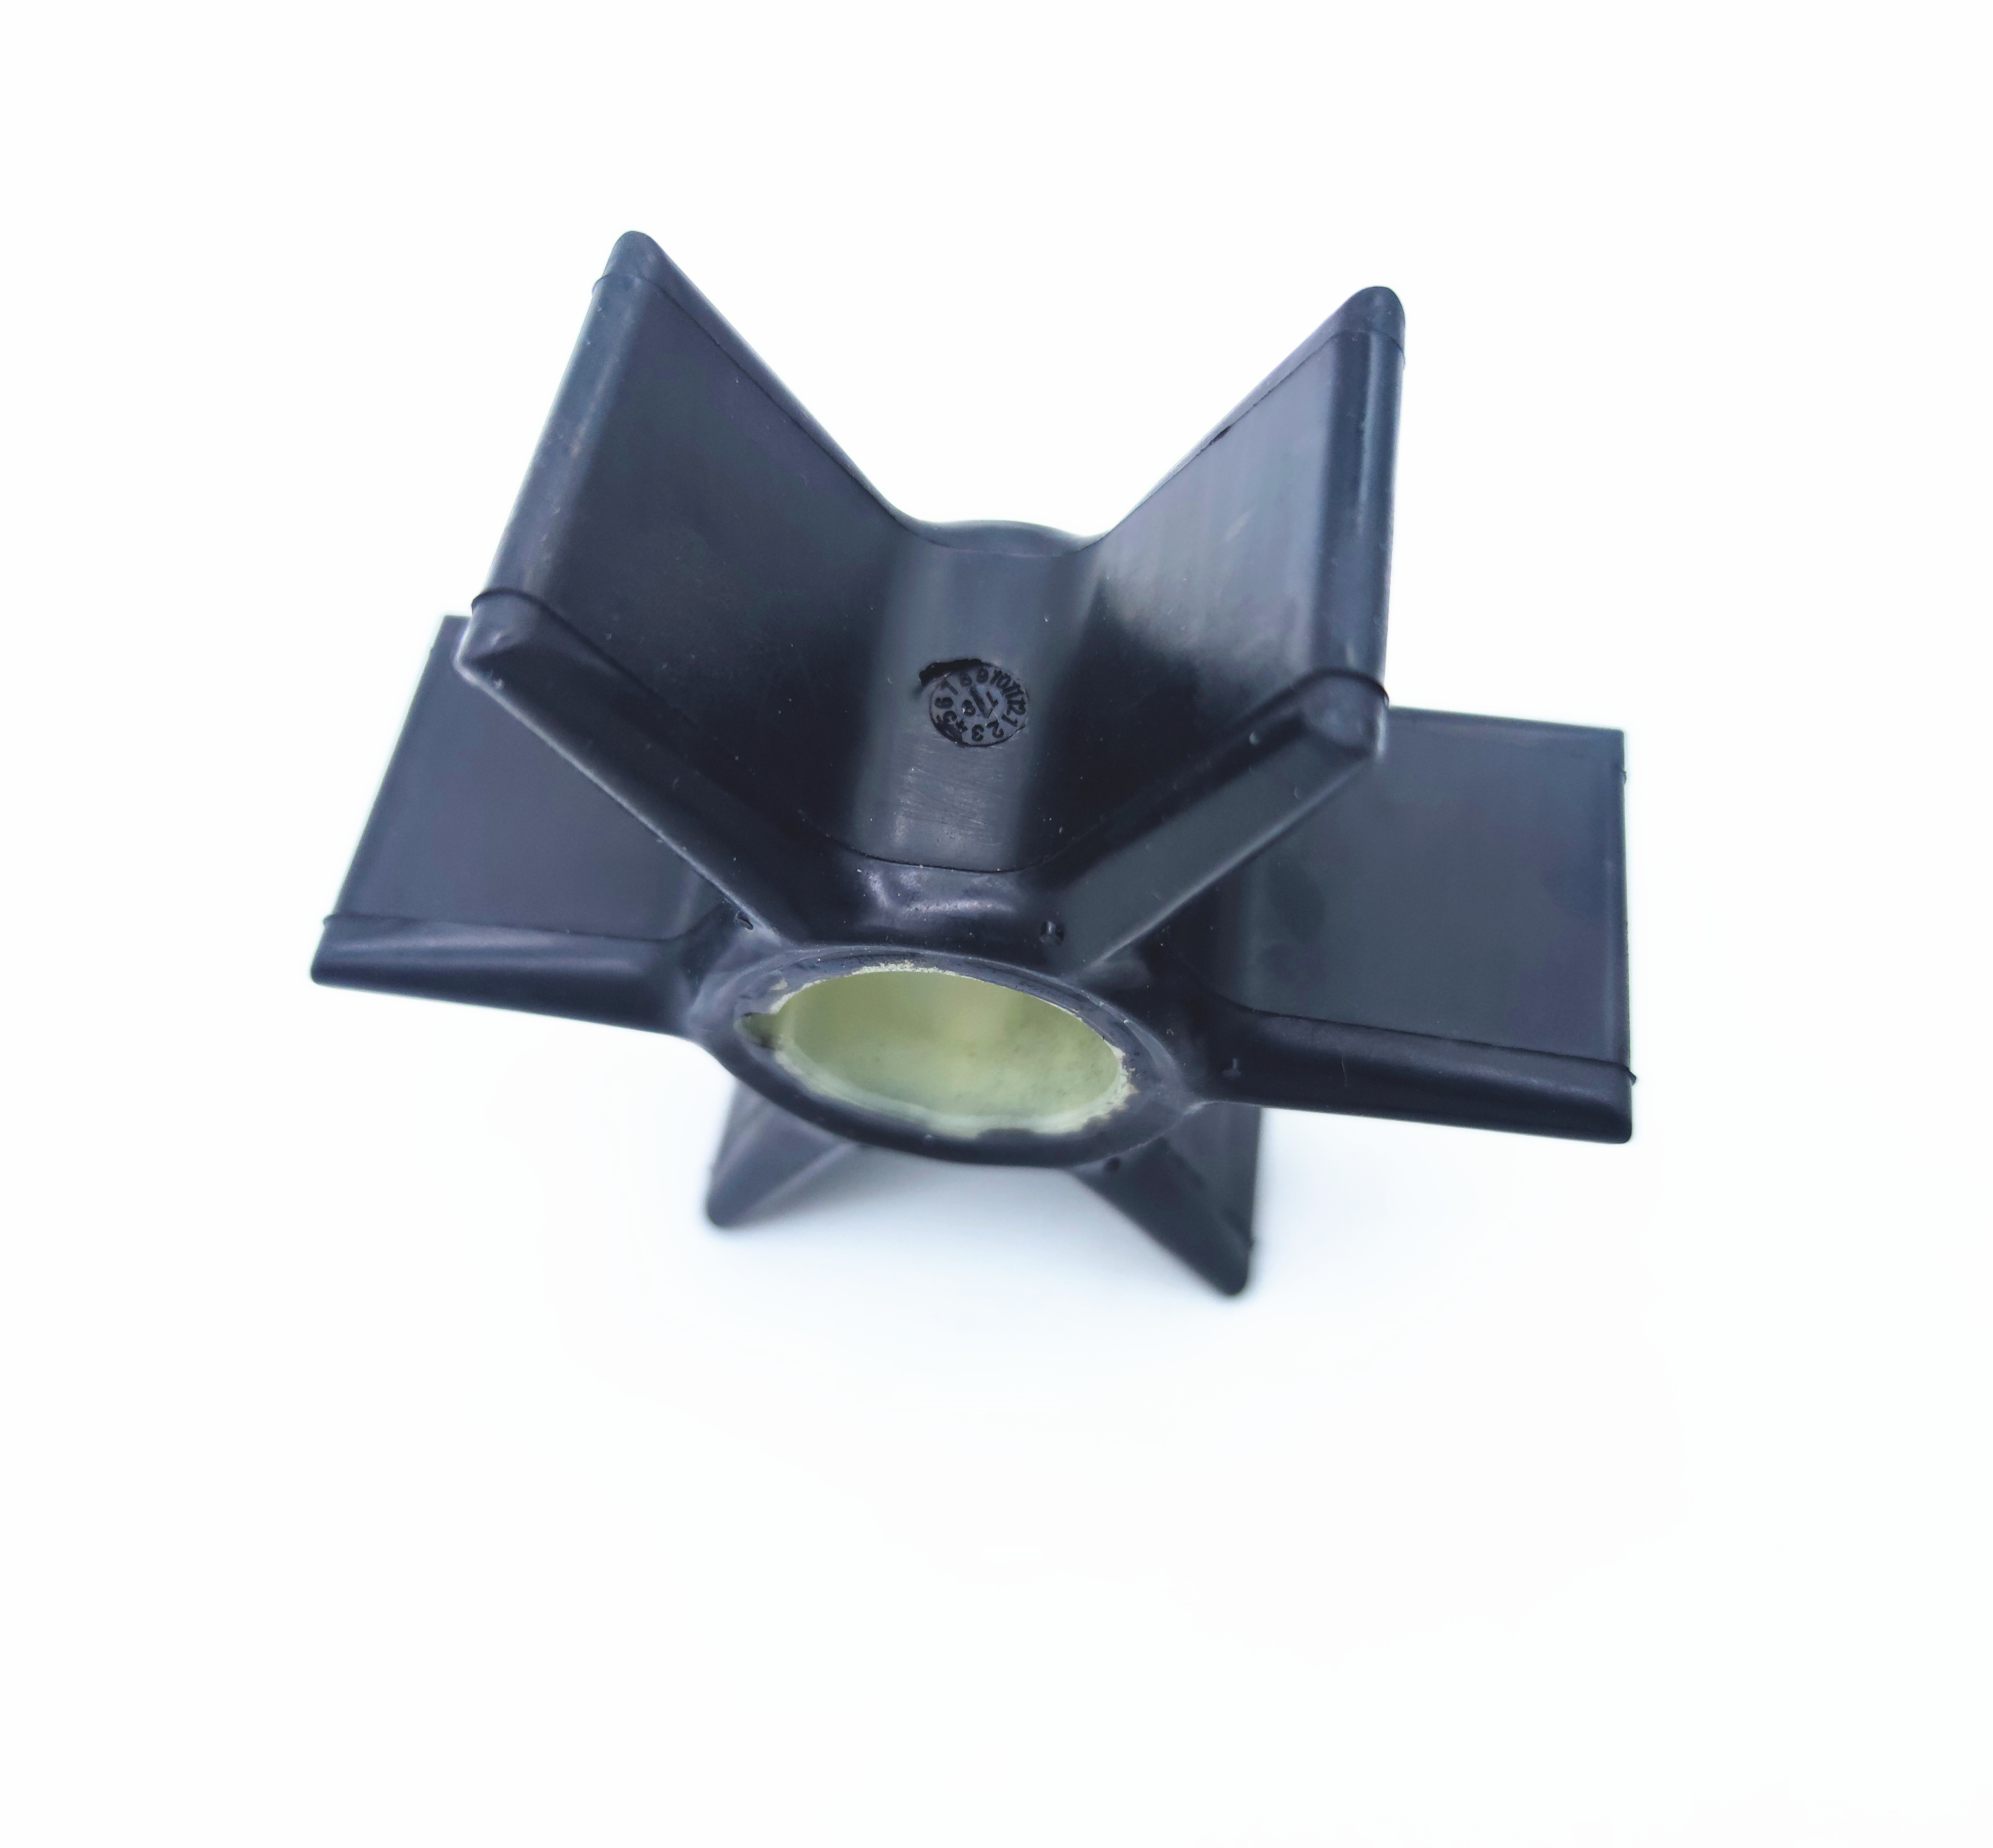 Boat Engines Water Pump Impeller 47-43026T2 47-430262Q02 89630 18-3056 for Force / Mercury Marine O